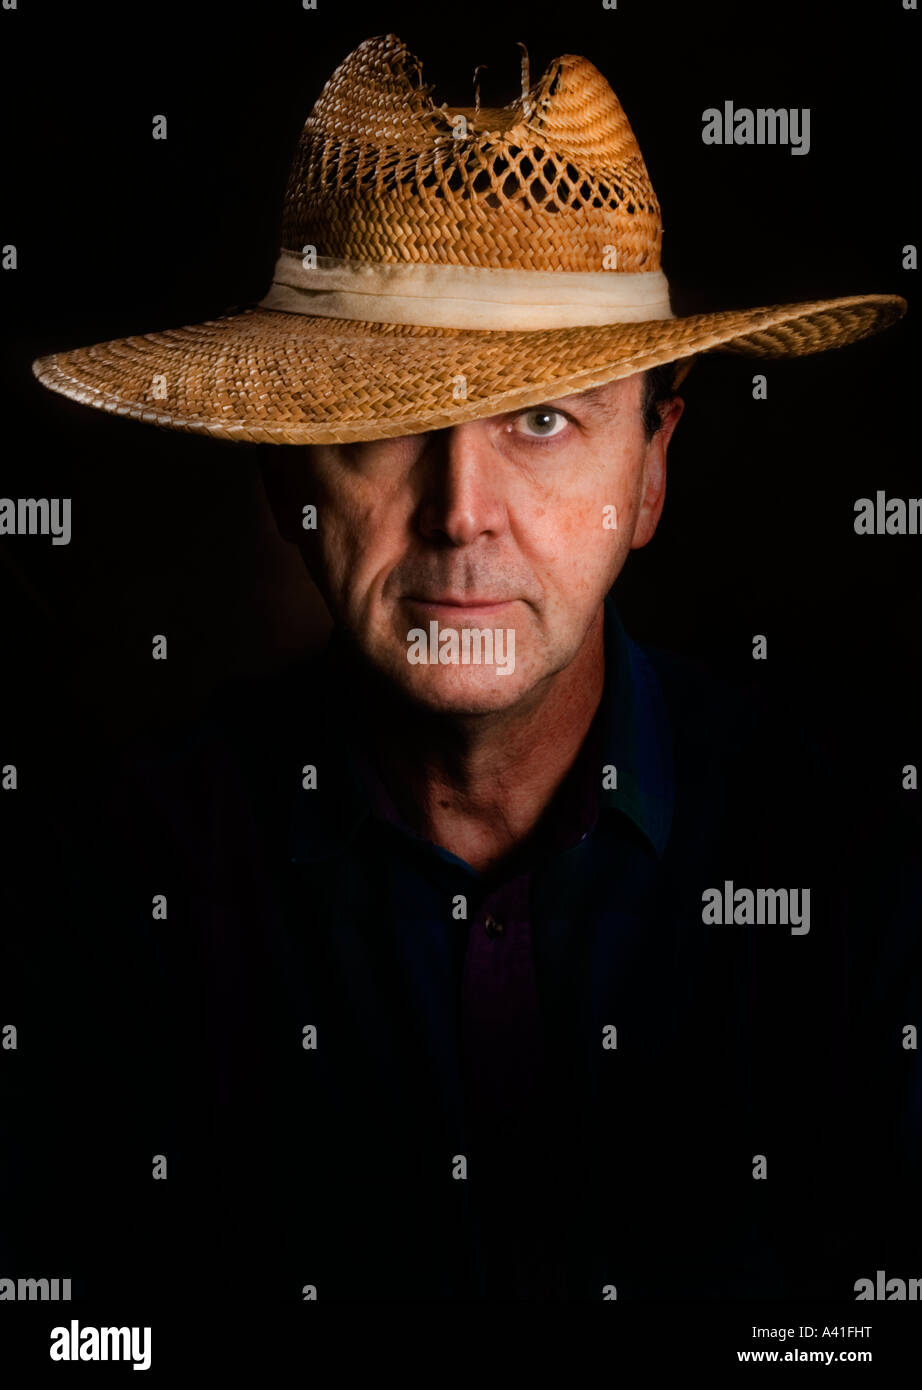 https://c8.alamy.com/comp/A41FHT/portrait-of-a-man-in-a-straw-fishing-hat-A41FHT.jpg